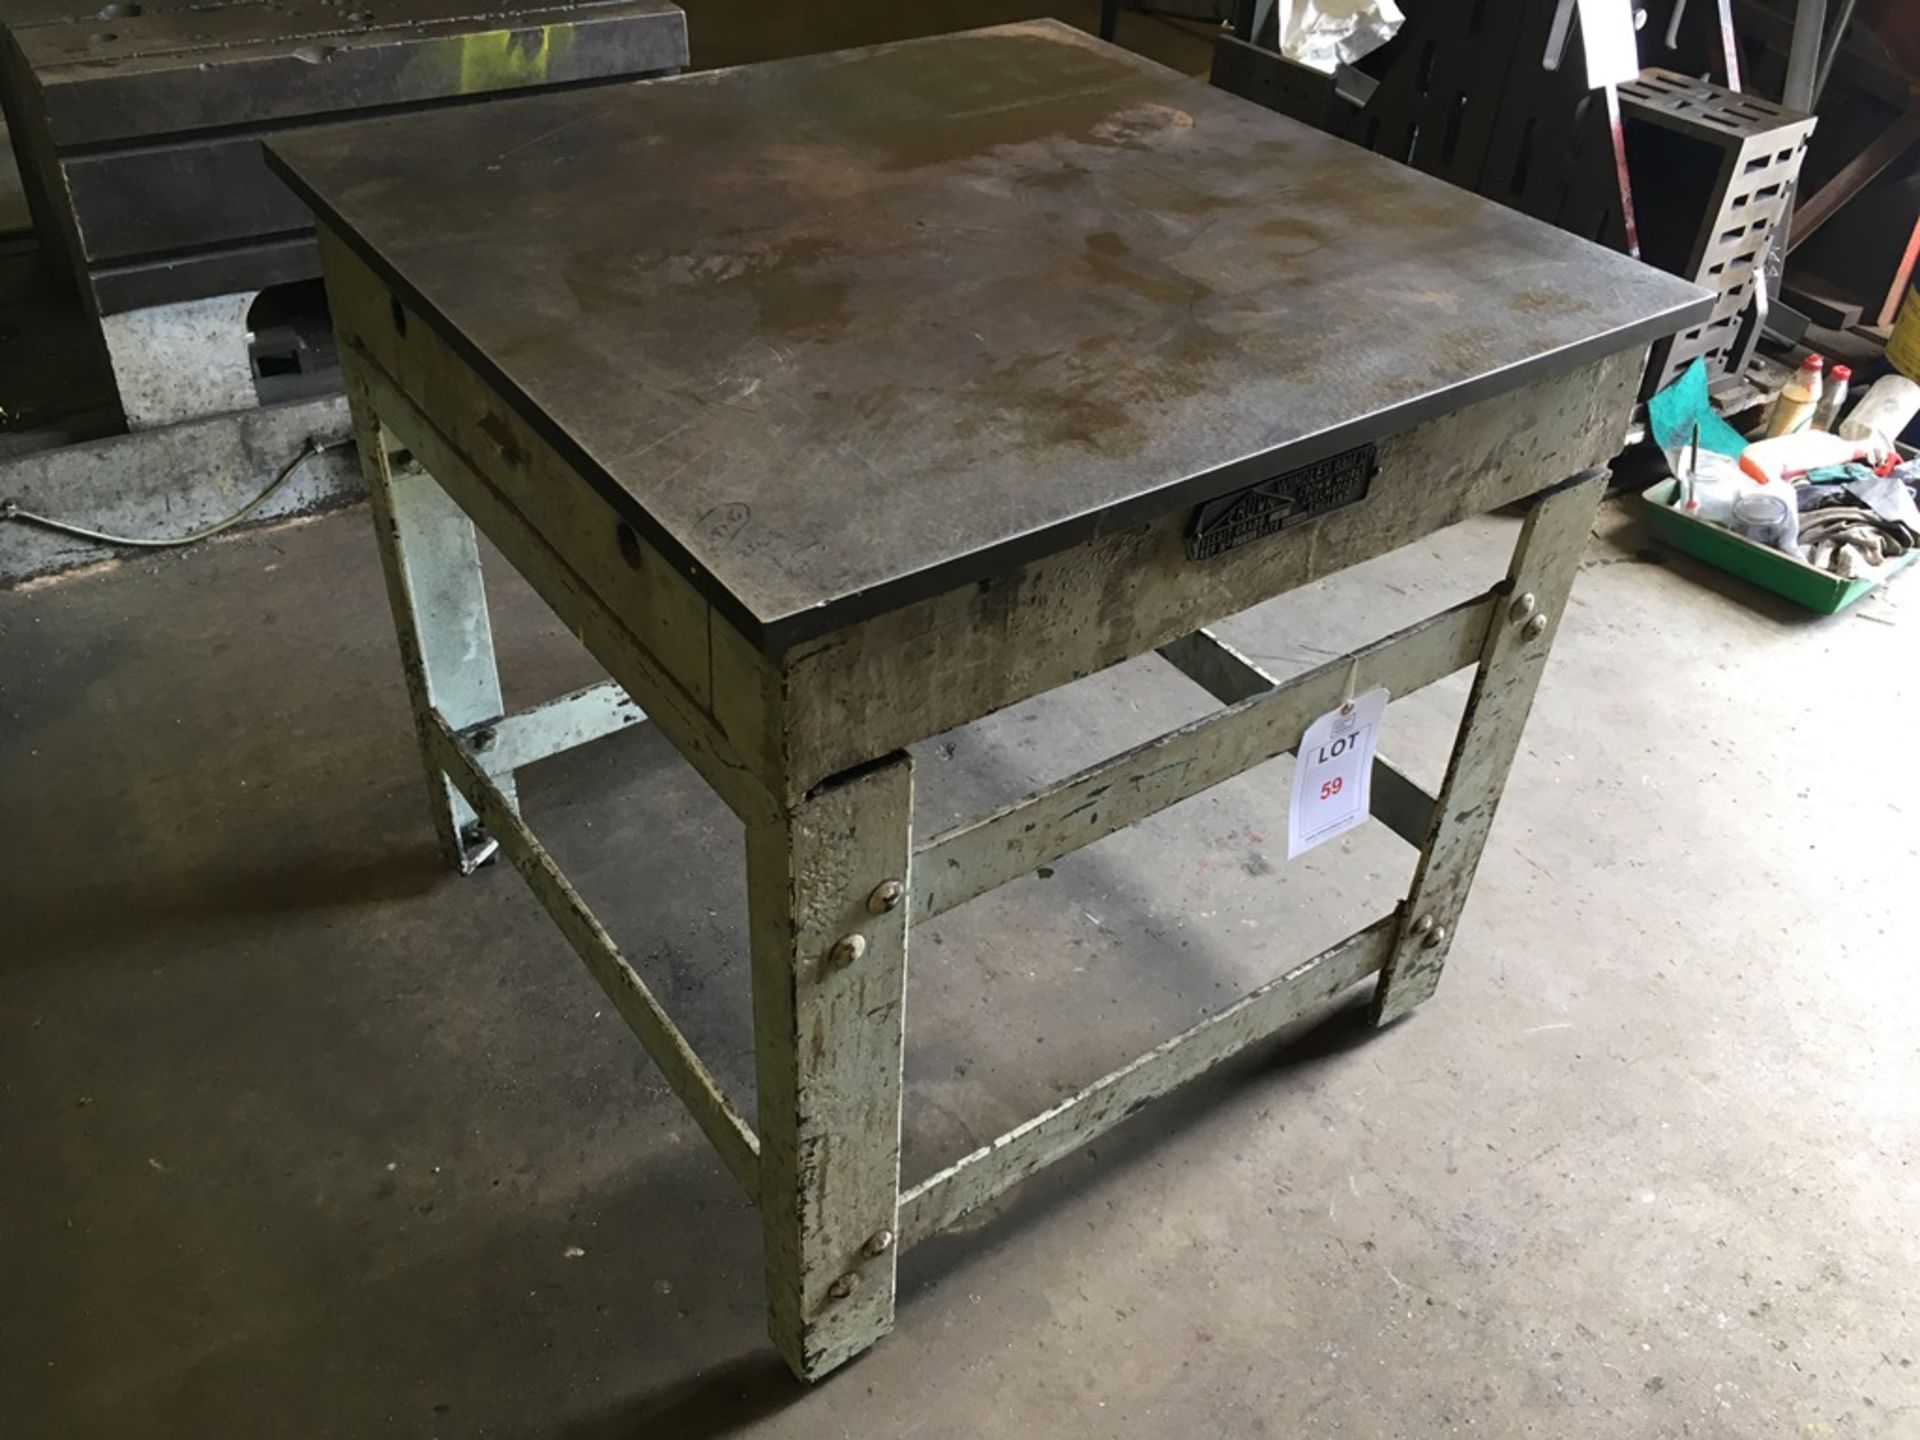 Steel inspection table (Please note: A work Method Statement and Risk Assessment must be reviewed